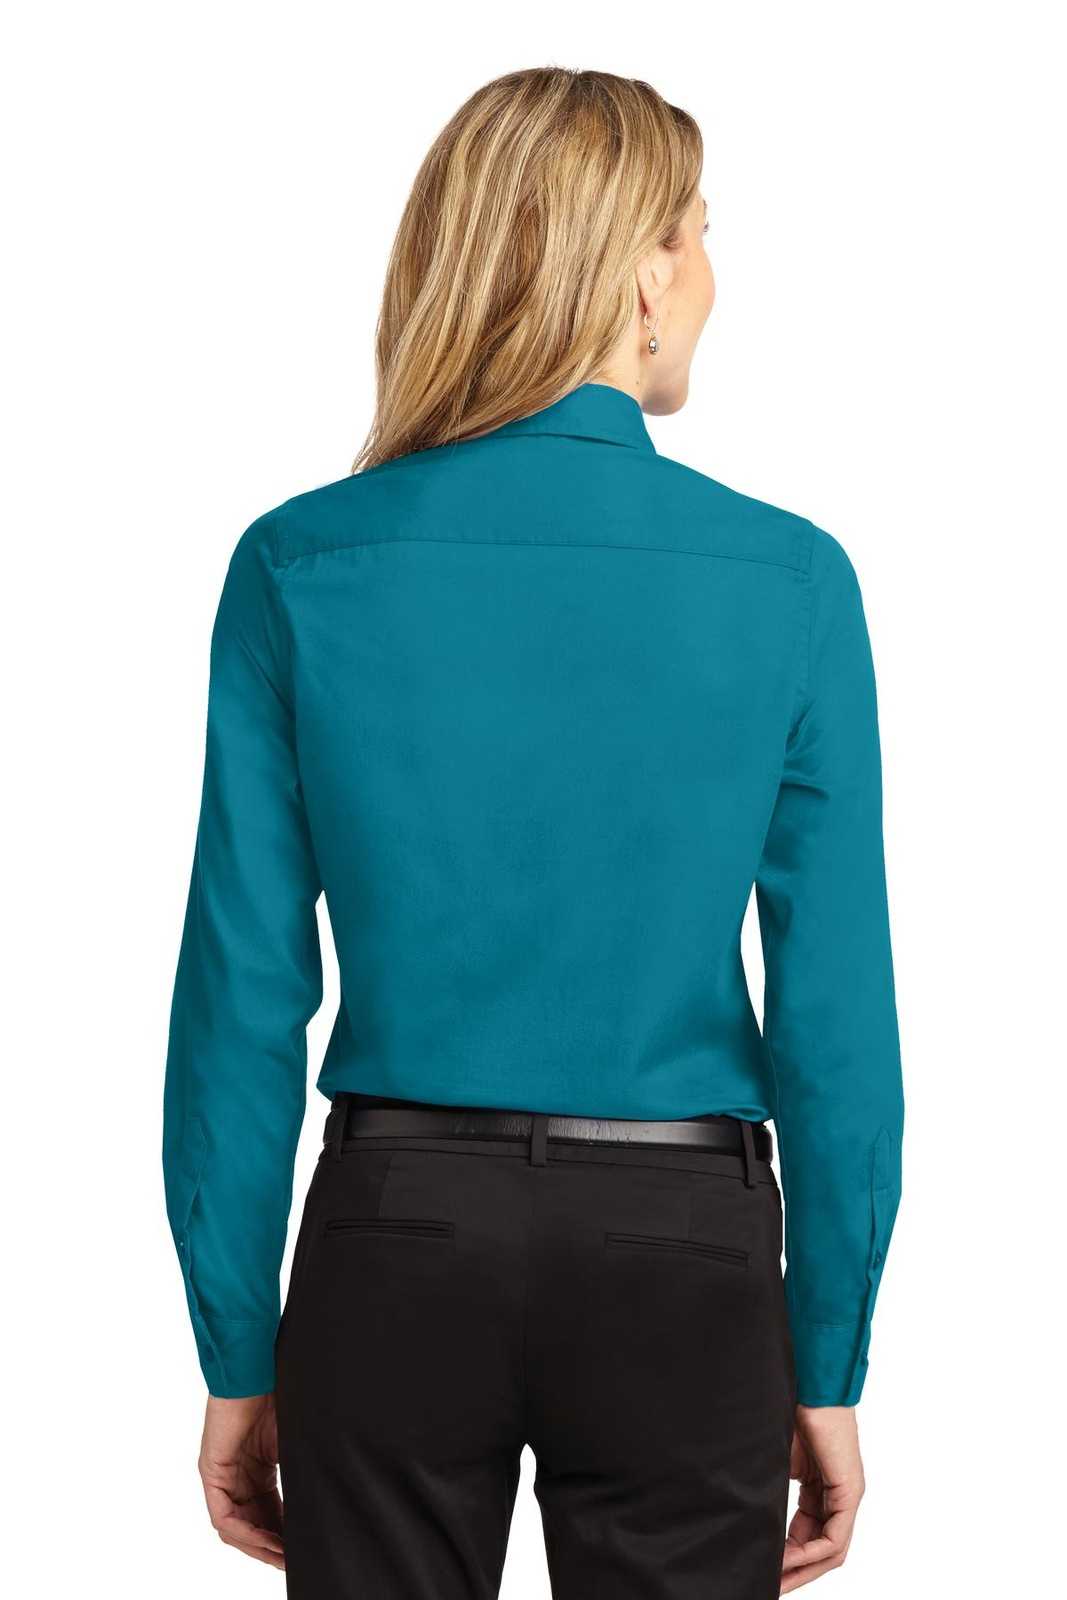 Port Authority L608 Ladies Long Sleeve Easy Care Shirt - Teal Green - HIT a Double - 2